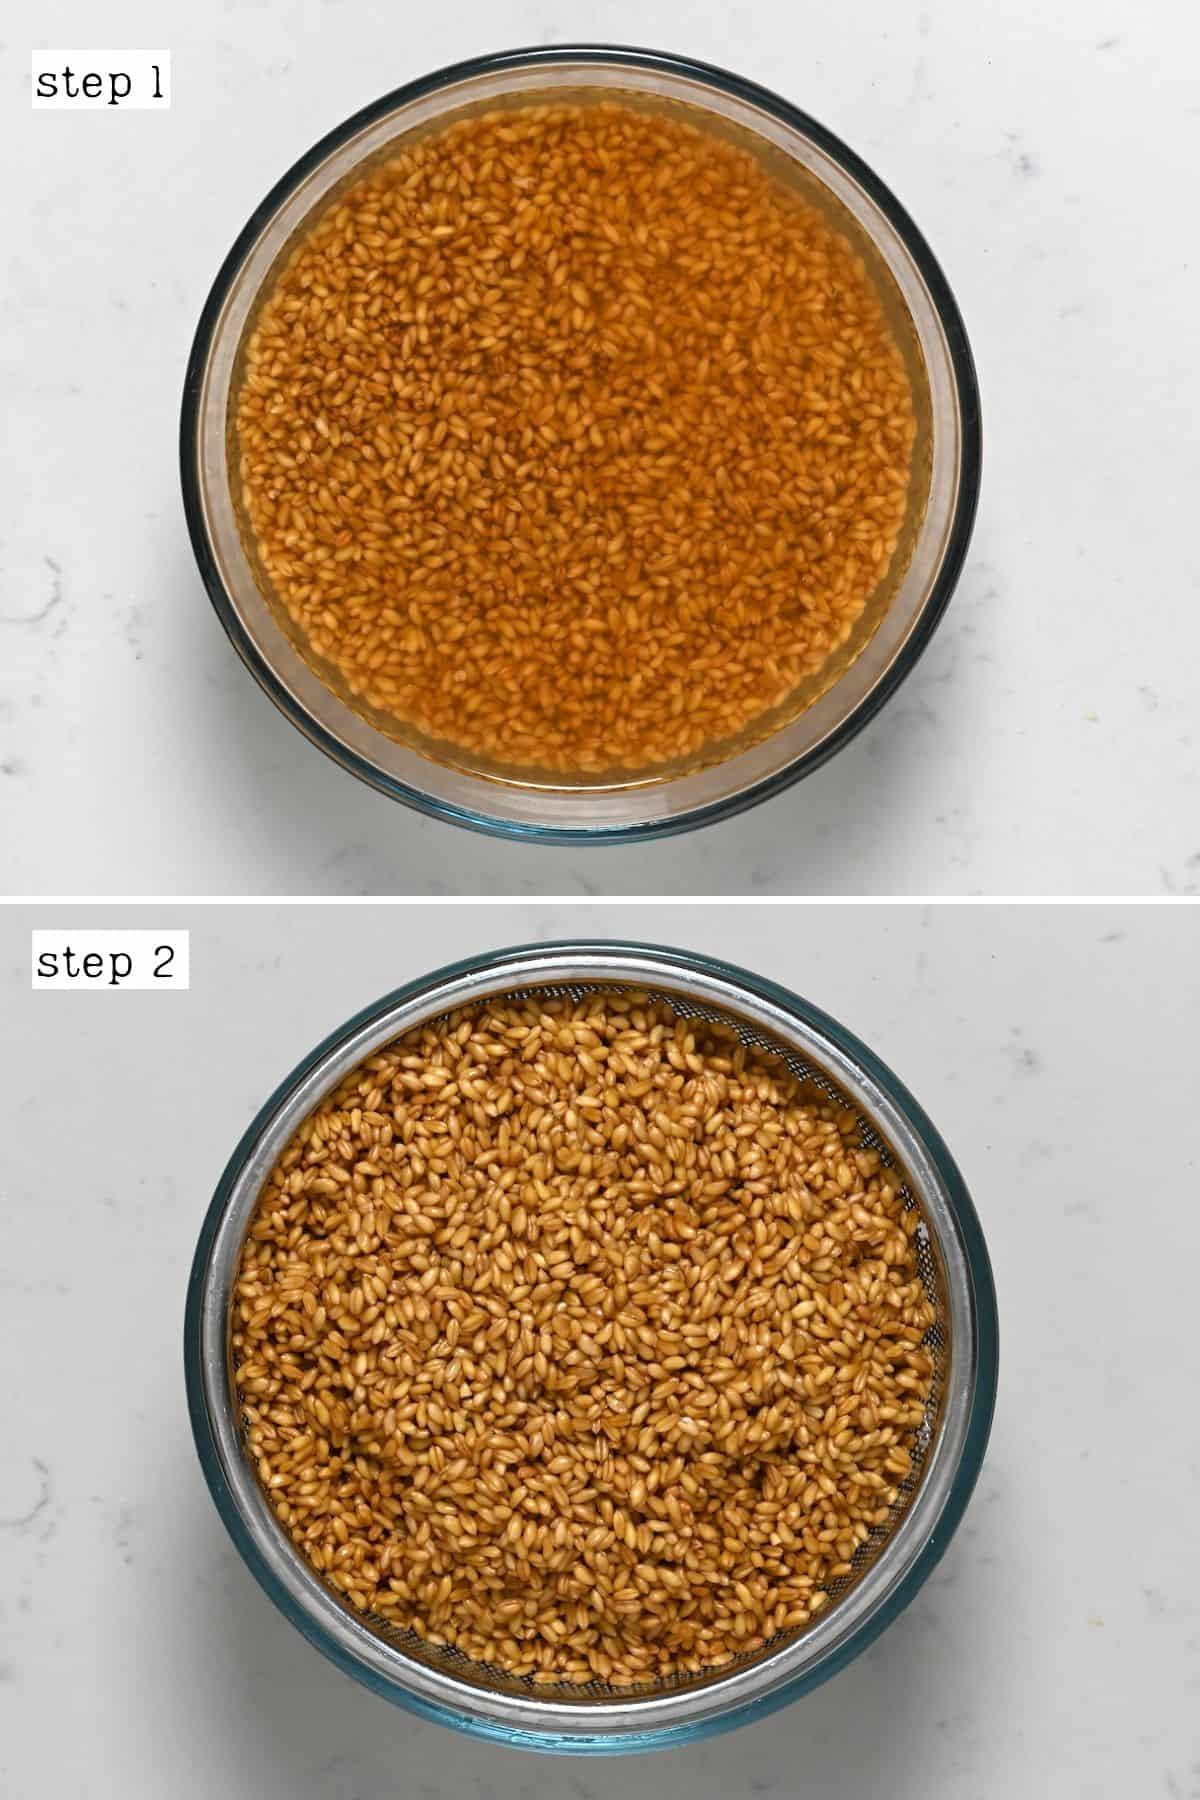 Steps for soaking wheat berries